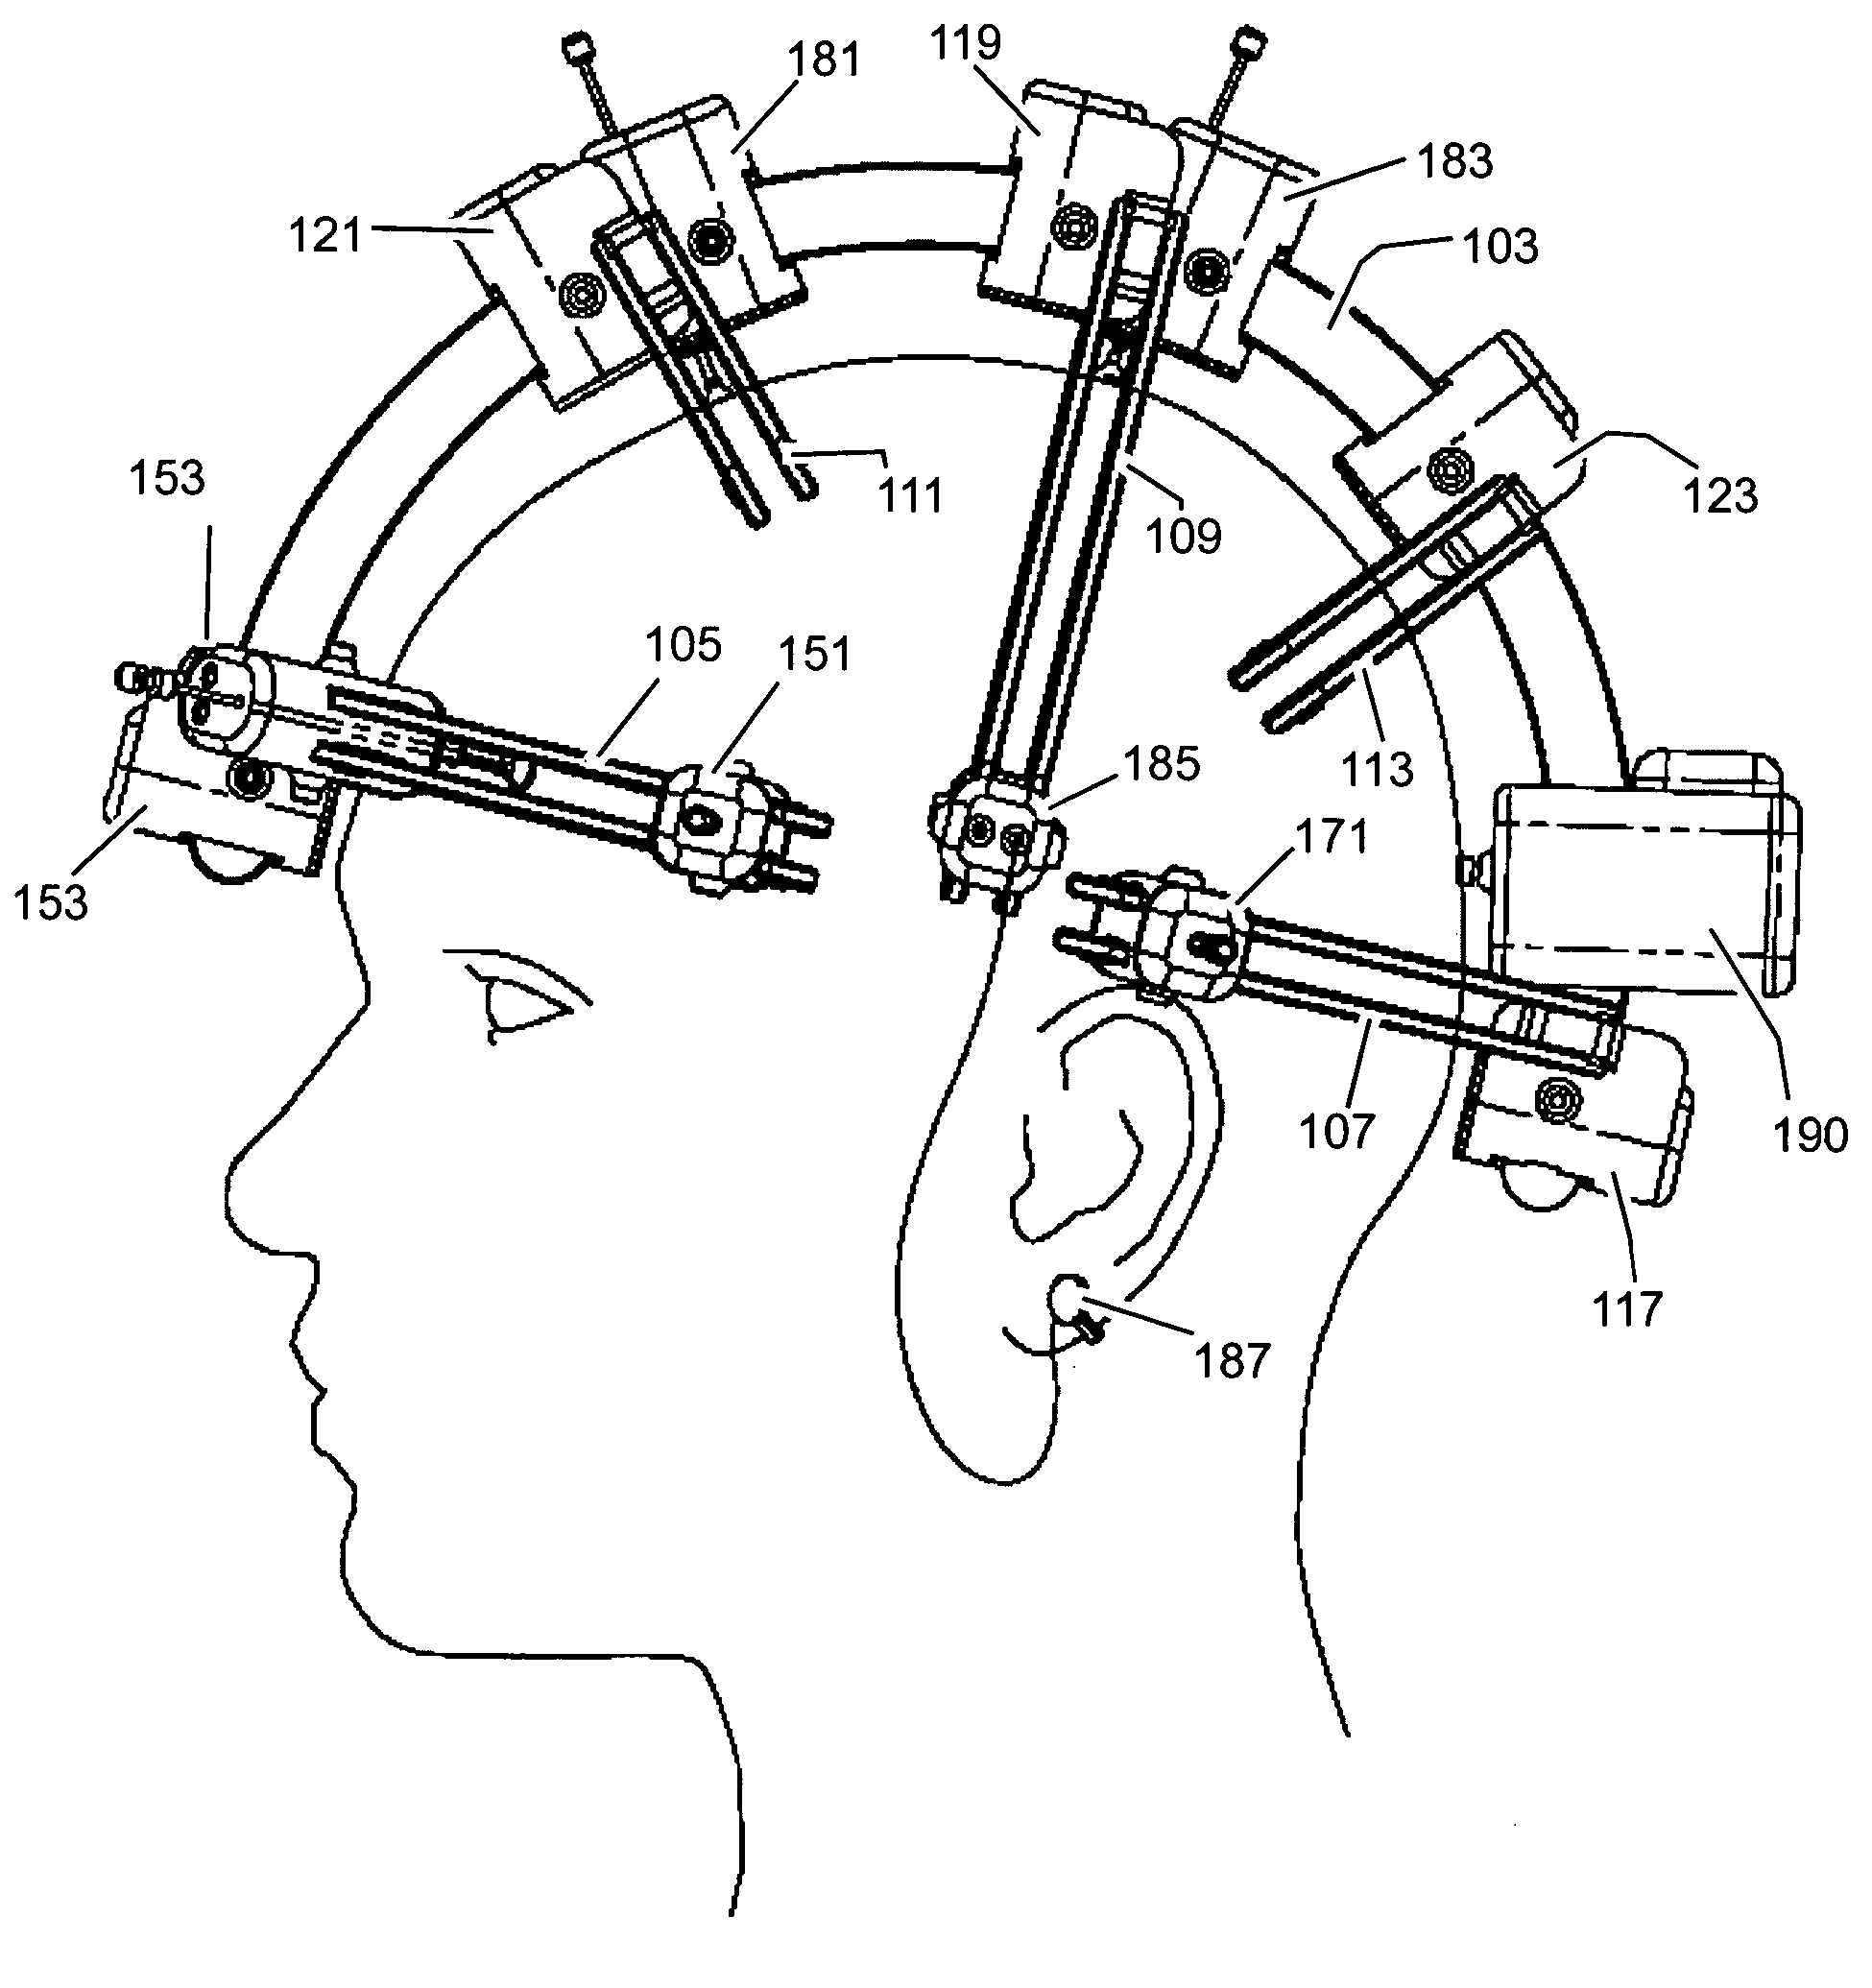 Methods and apparatus for positioning and retrieving information from a plurality of brain activity sensors